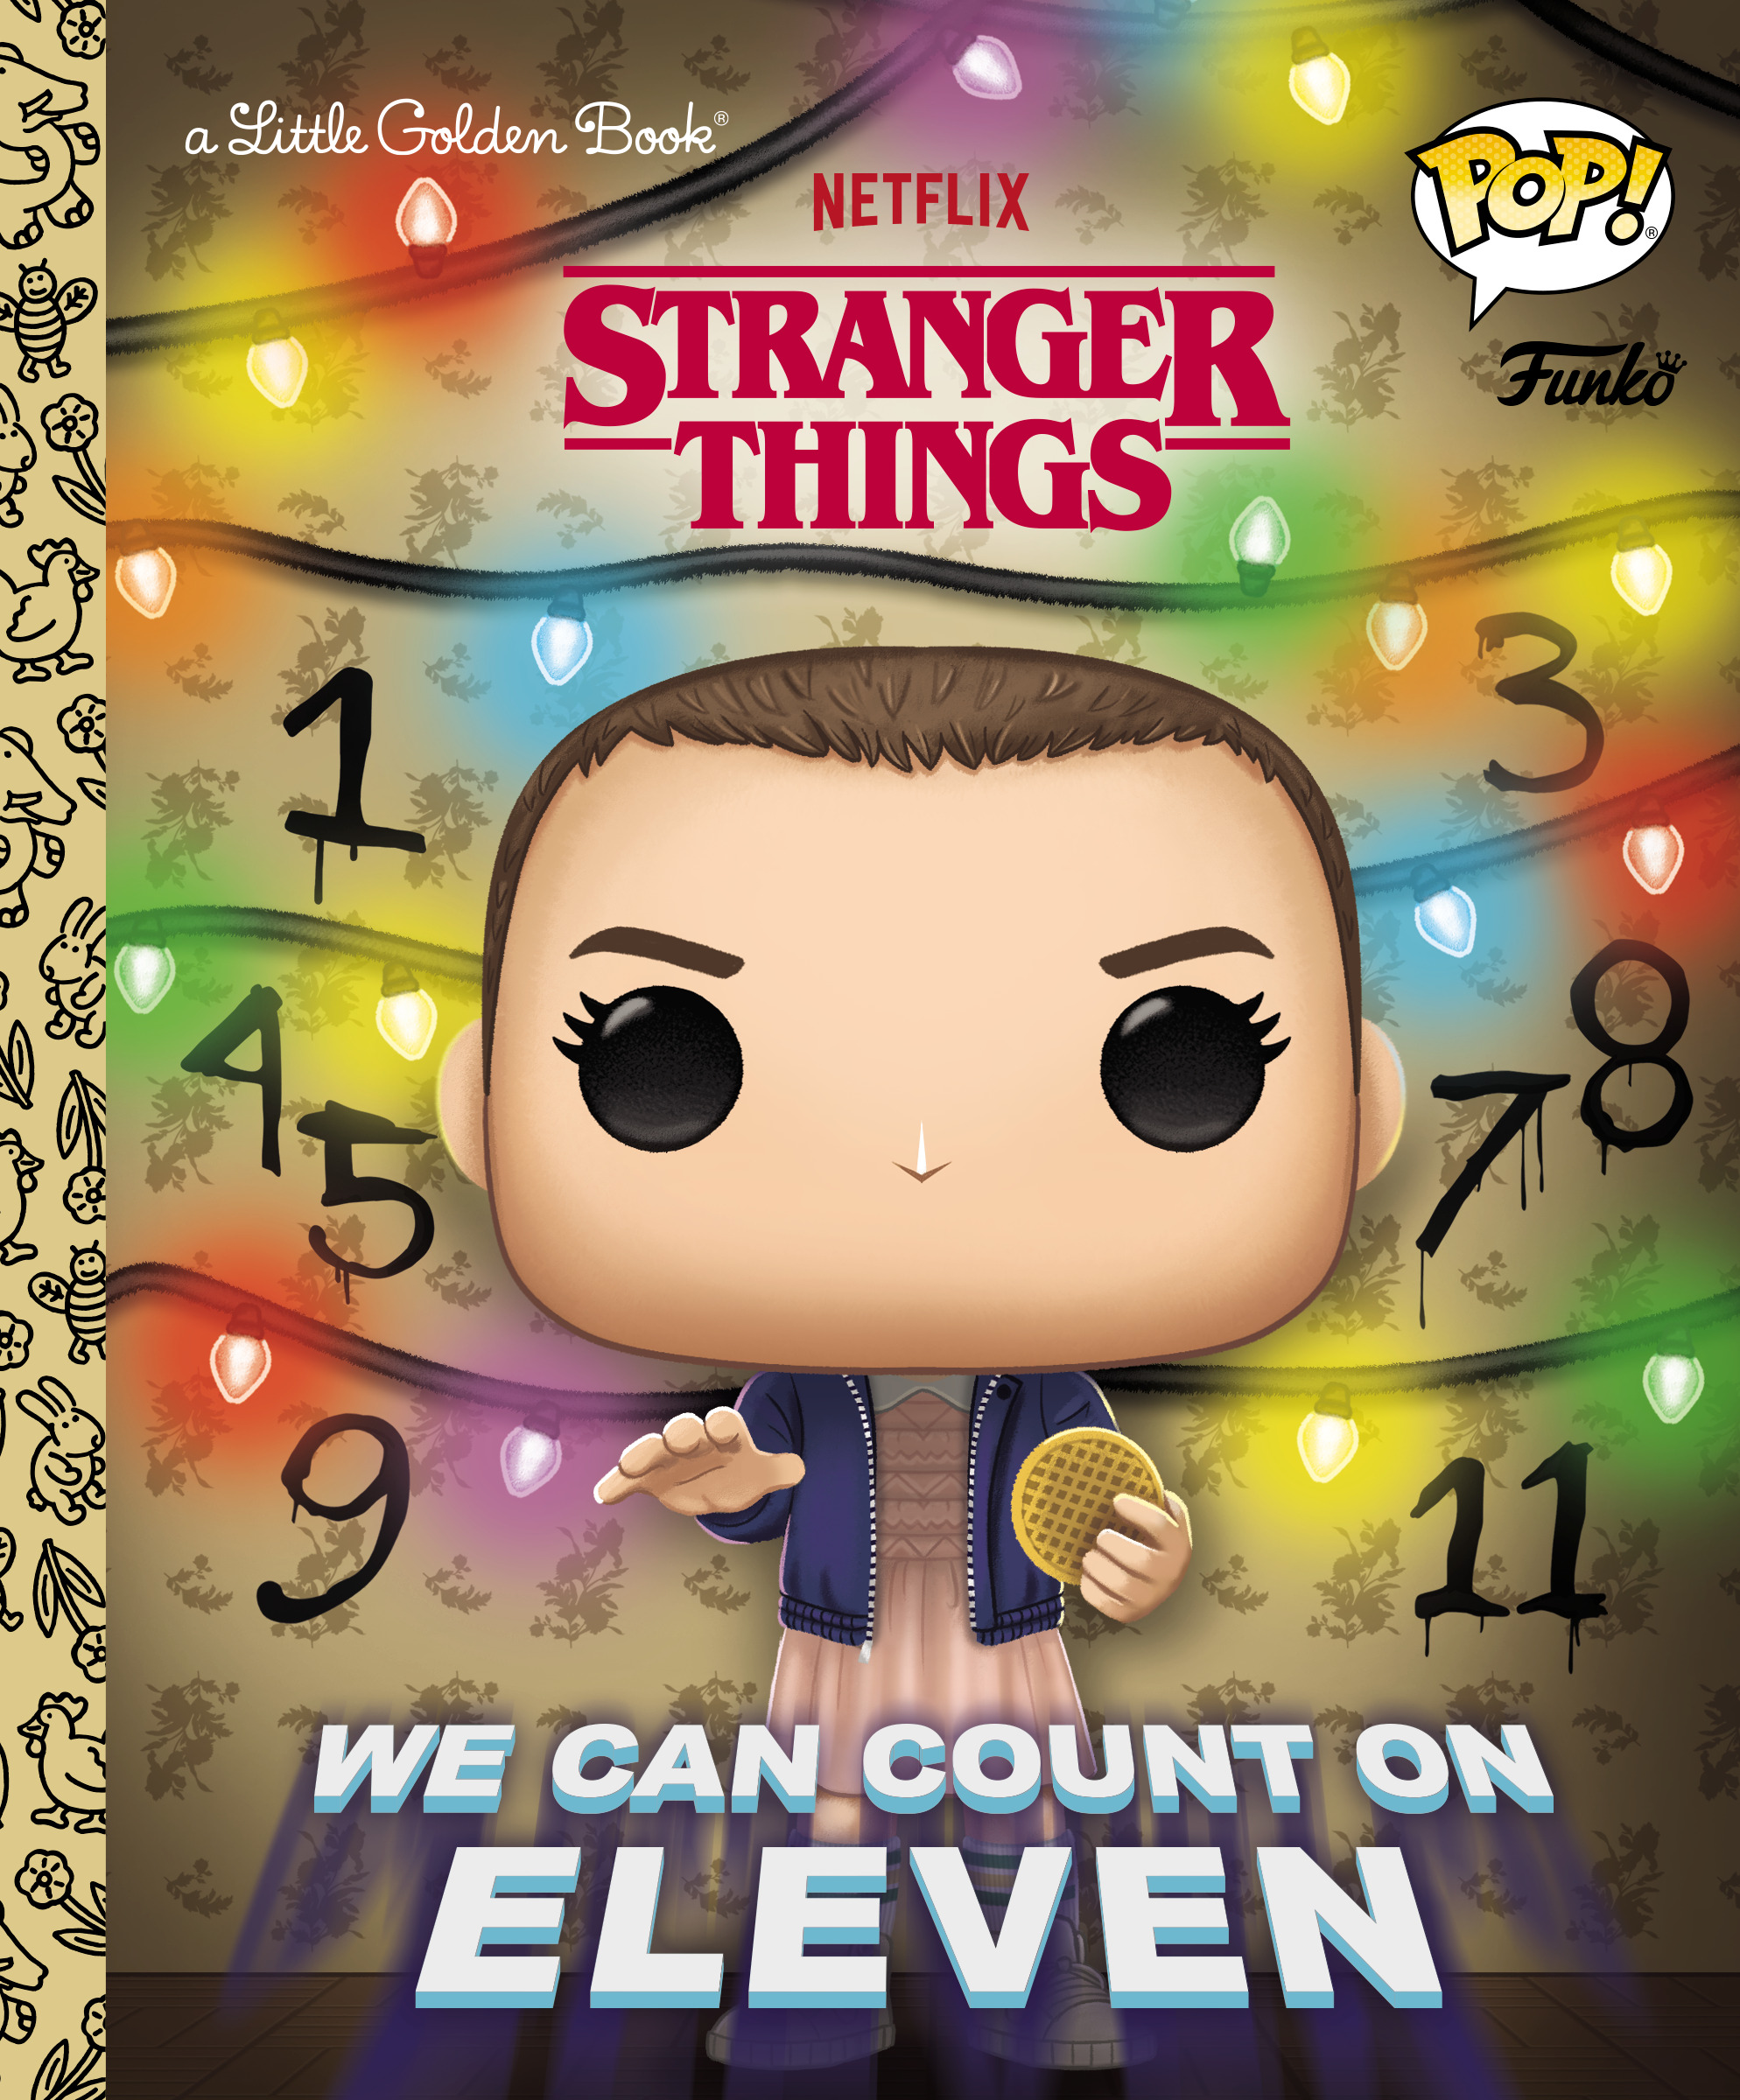 Stranger Things: We Can Count on Eleven (Funko Pop!) | Smith, Geof